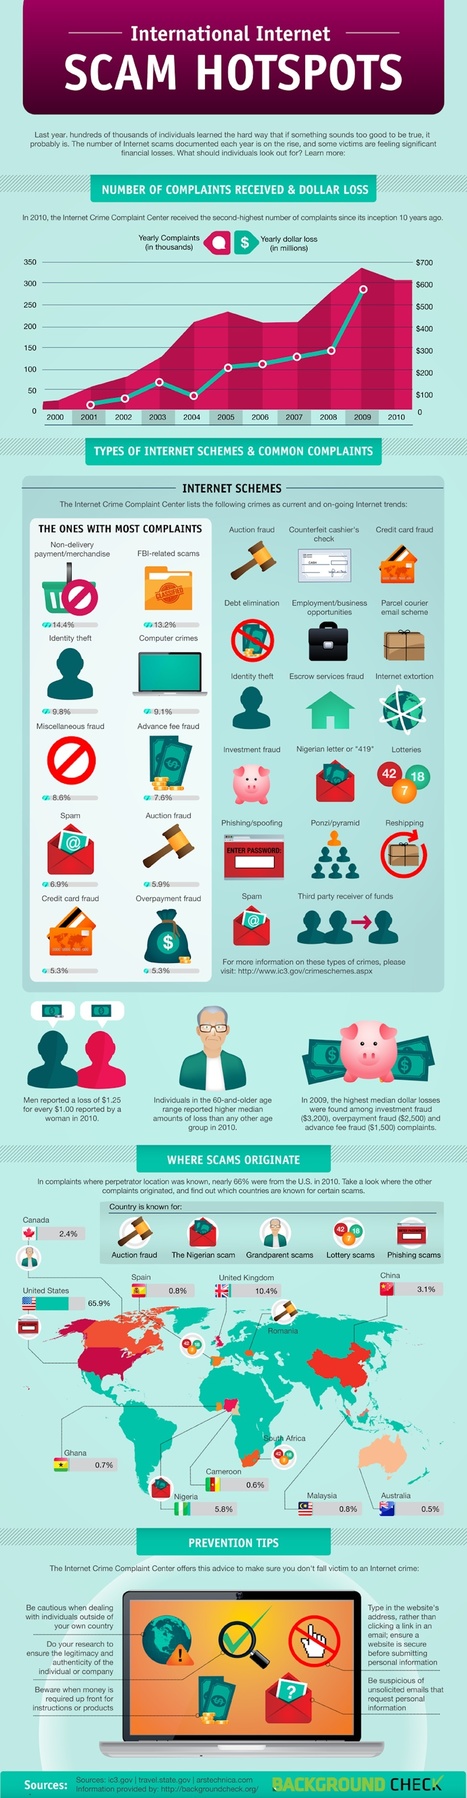 How to Avoid 17 Internet Scams [INFOGRAPHIC] | Latest Social Media News | Scoop.it